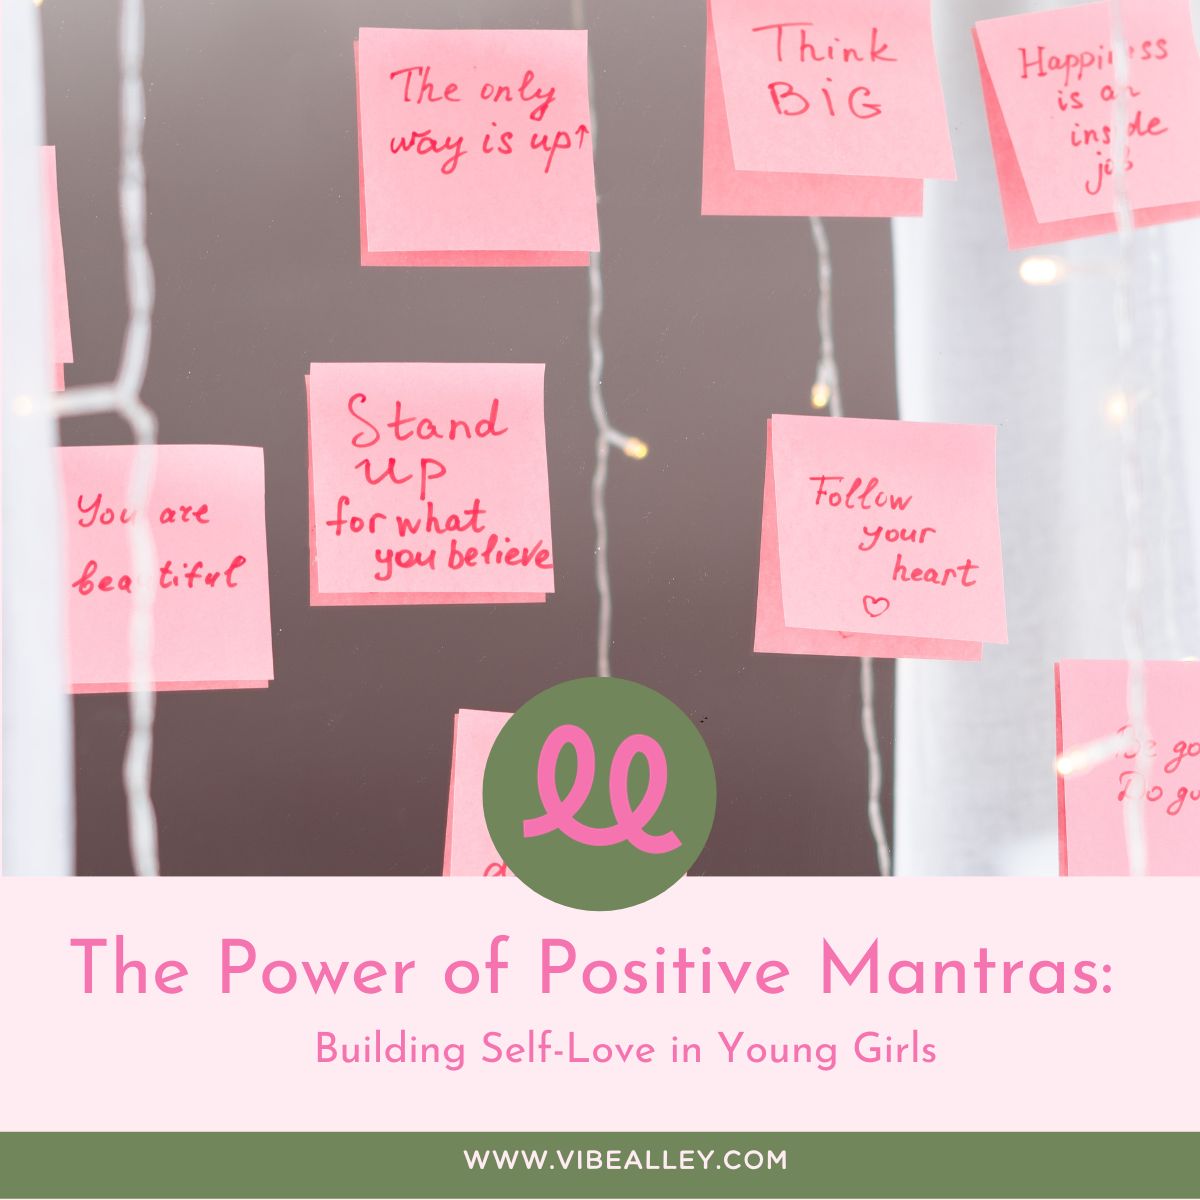 The Power of Positive Mantras: Building Self-Love in Young Girls